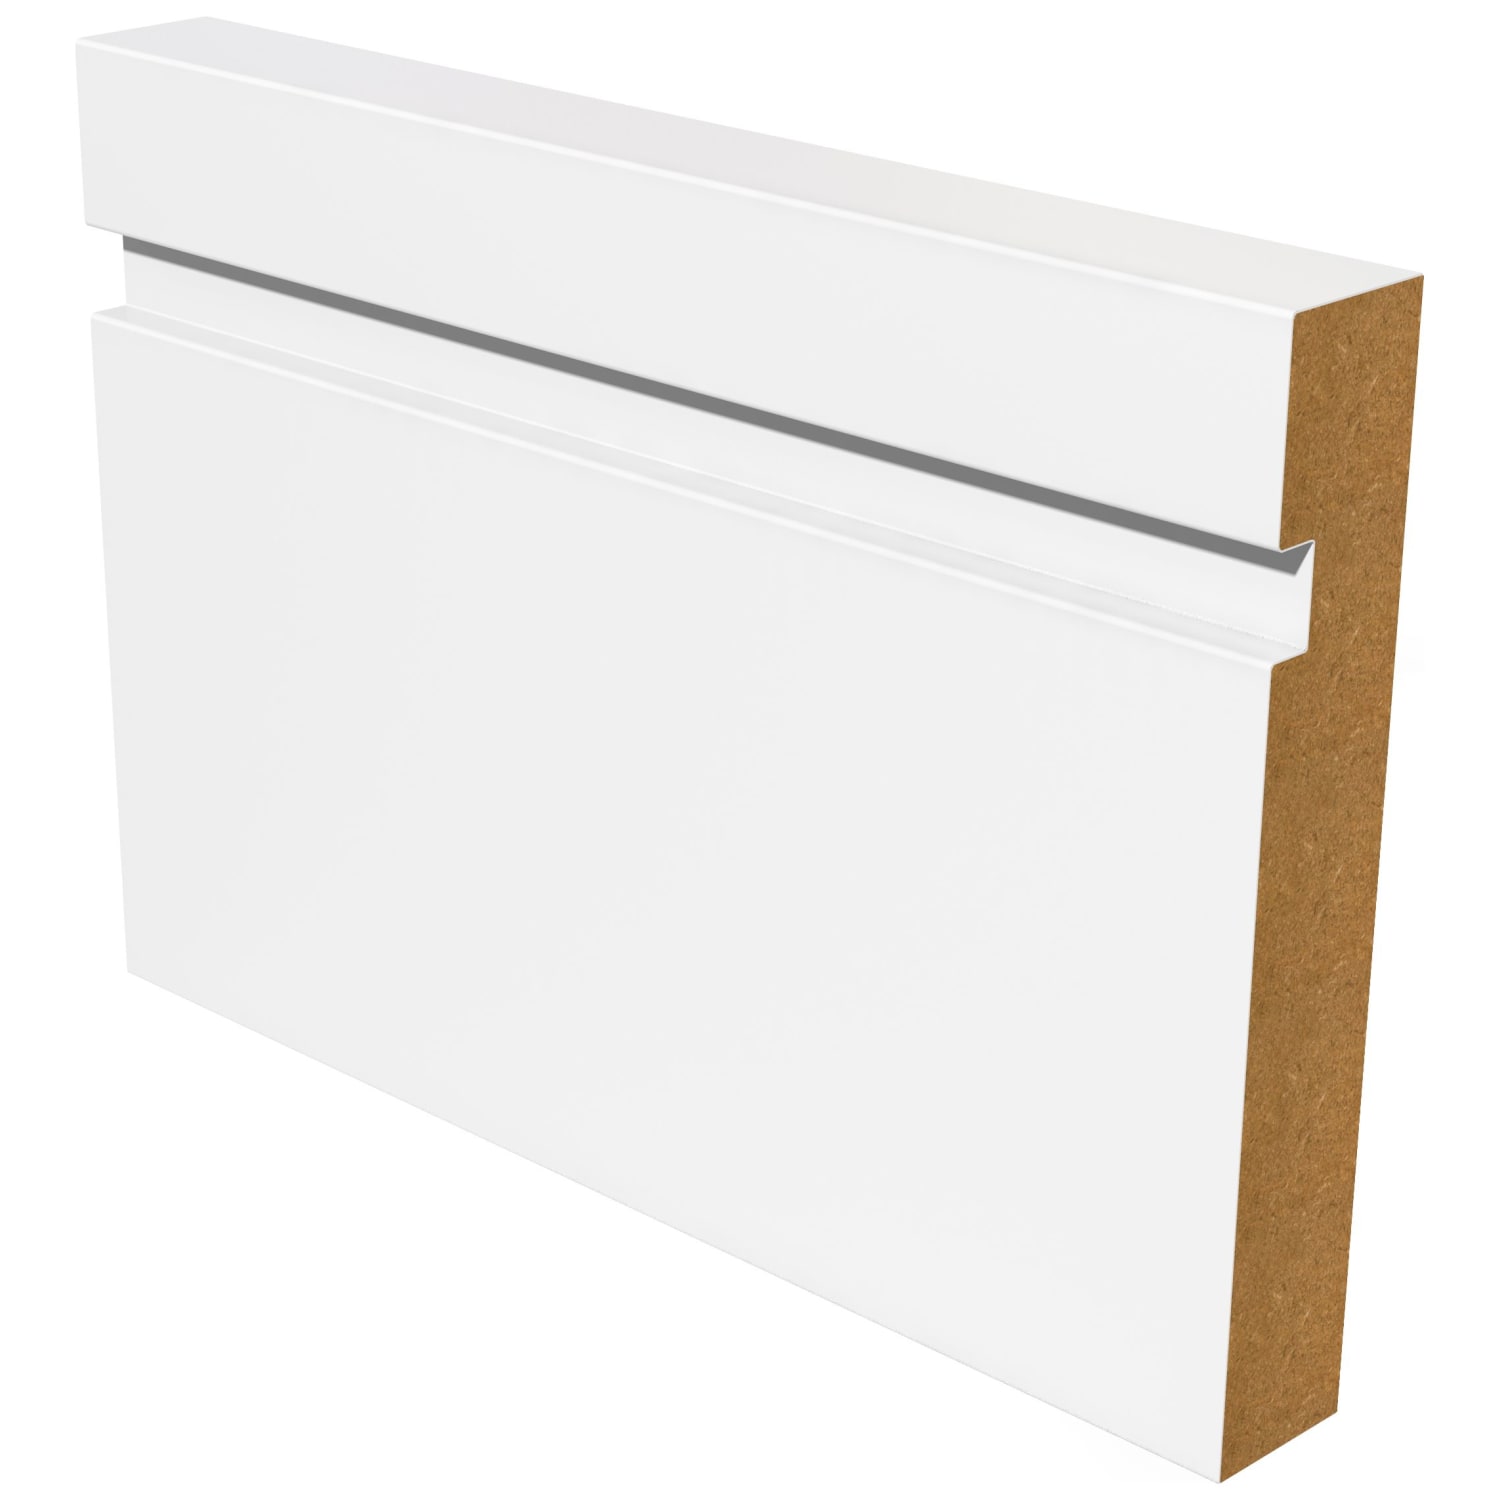 MDF Skirting Board Pre-Primed White 3m Moisture Resistant MDF Wall ...